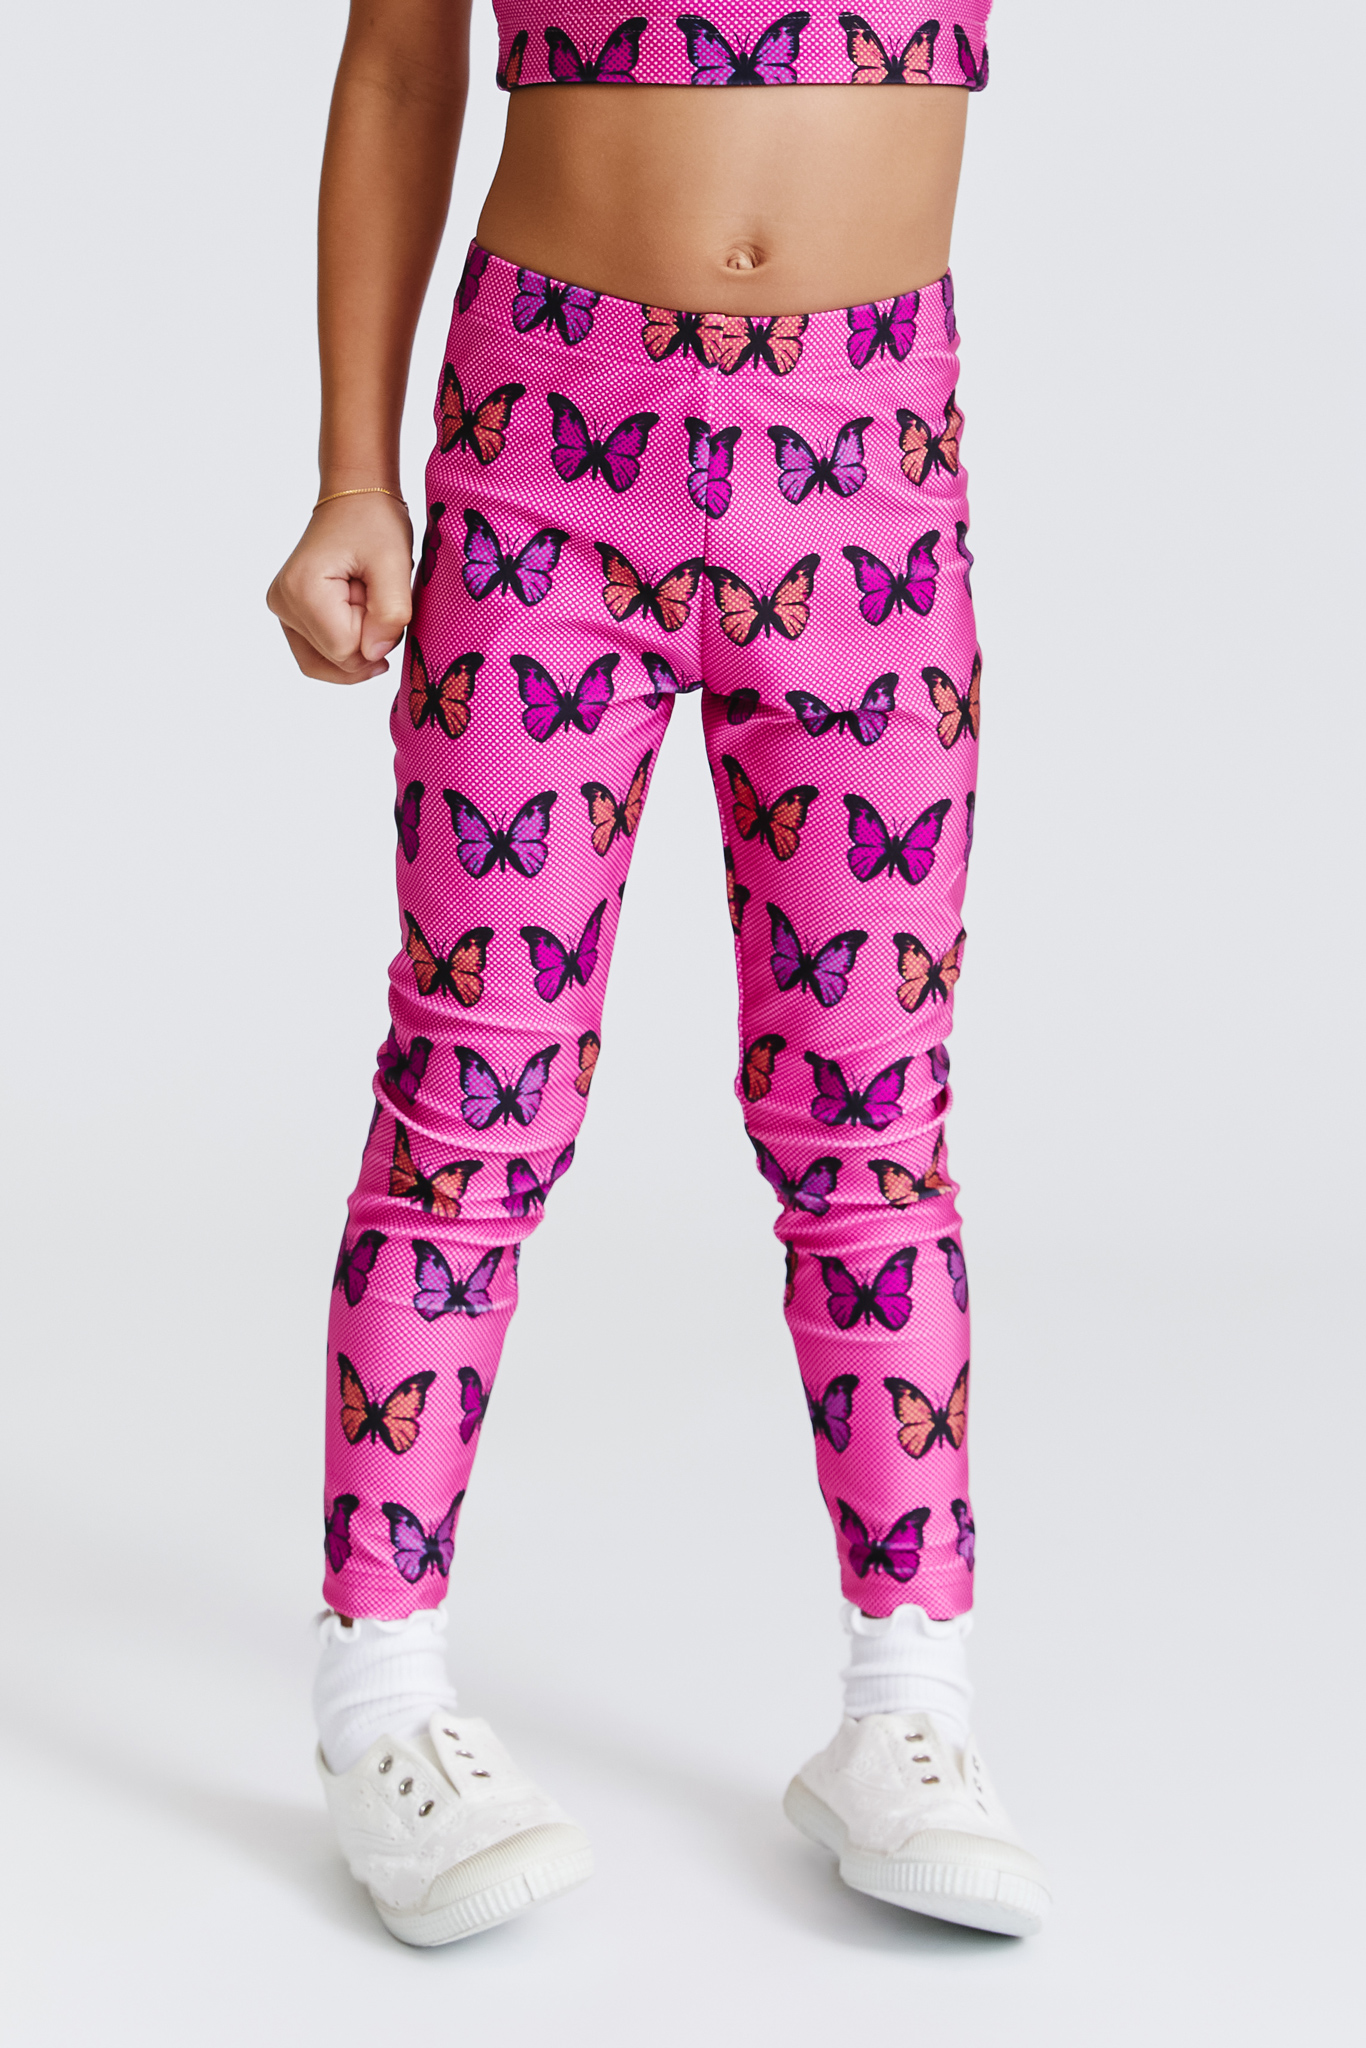 Toddler Leggings in Pink Halftone Butterfly